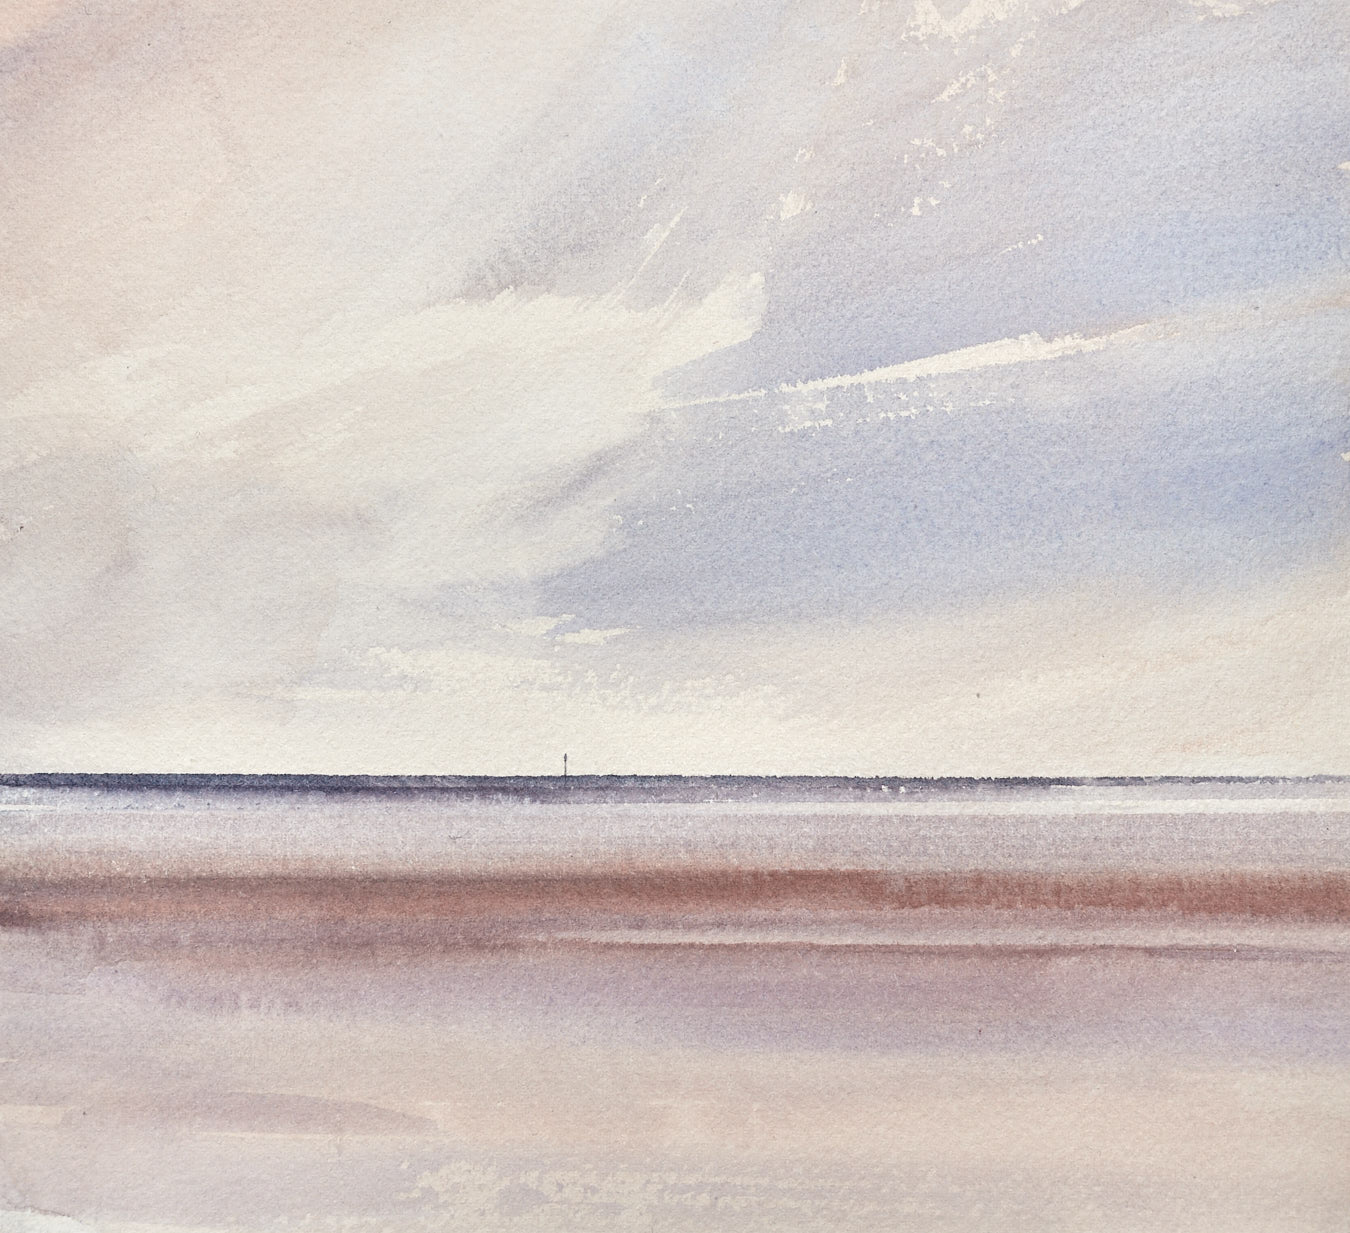 Large image of Light over the sea, Lytham original watercolour painting